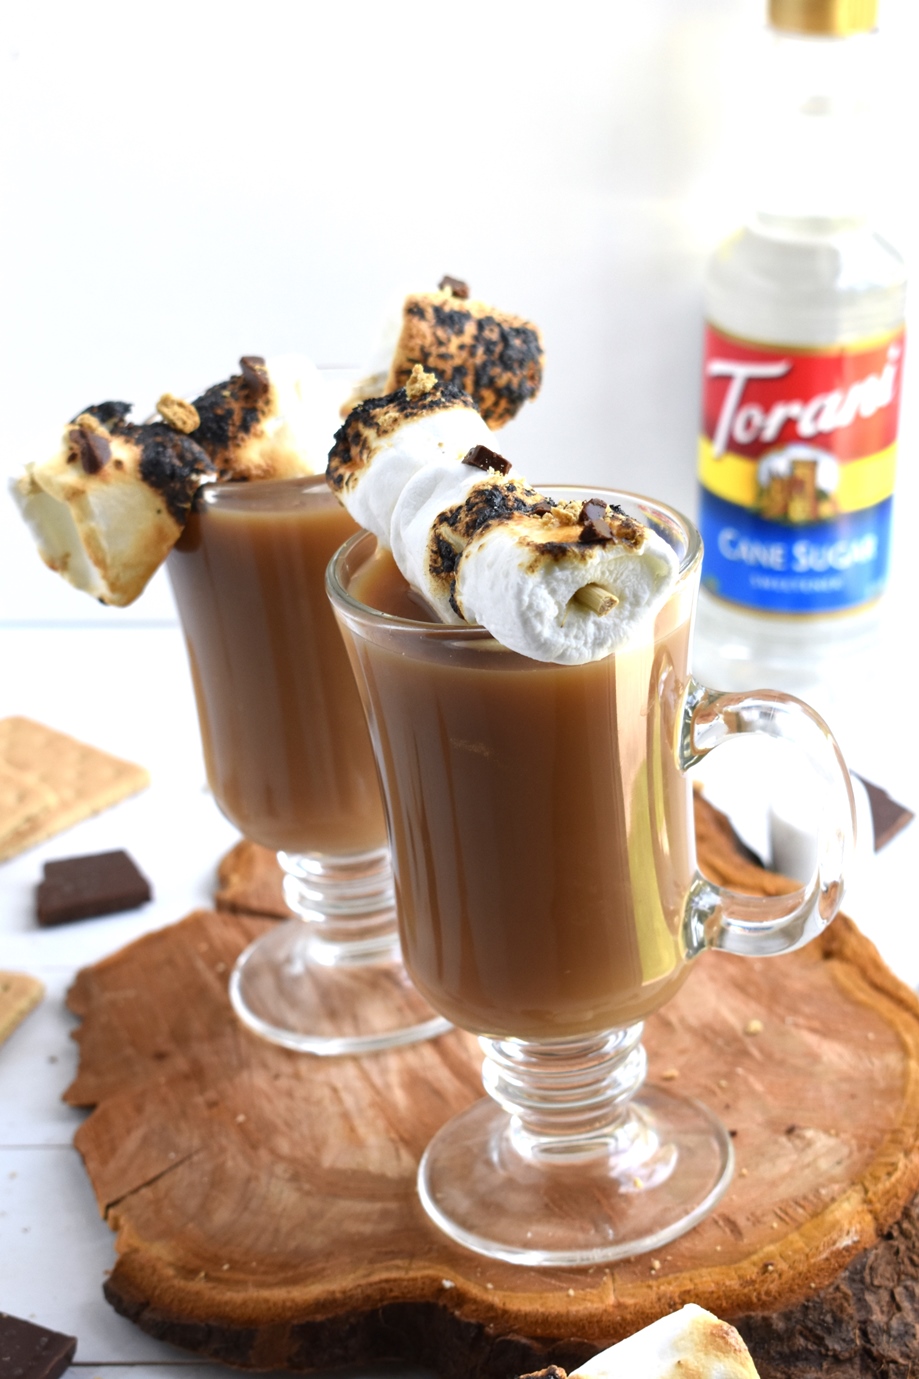 S'mores Coffee